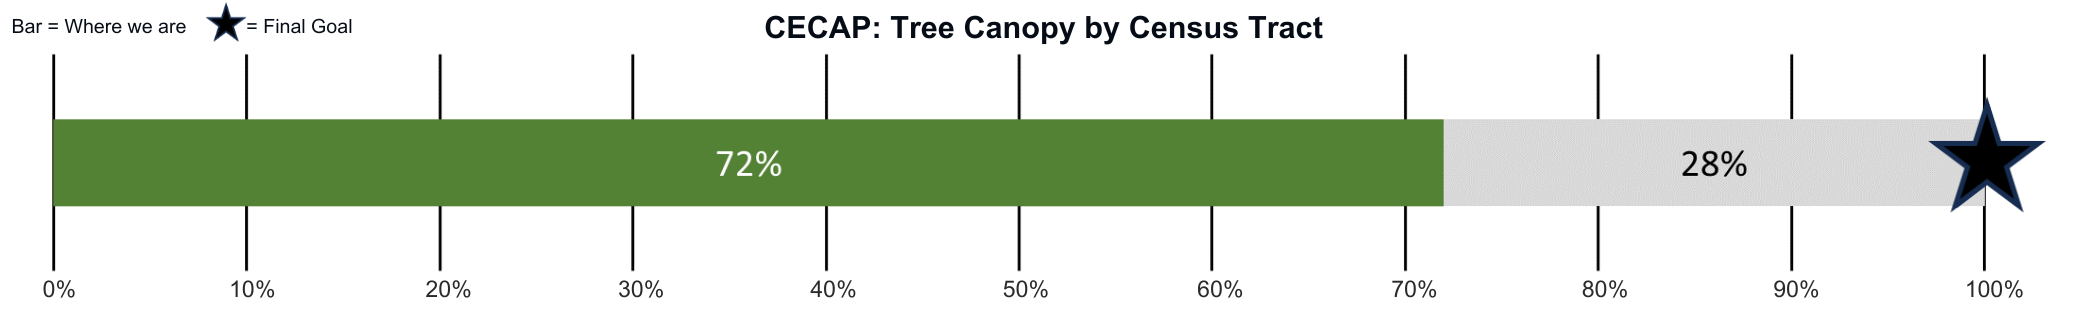 CECAP_ 100% of Census Tracts have at least 40% canopy by 2030 goal bar with progress showing 72%